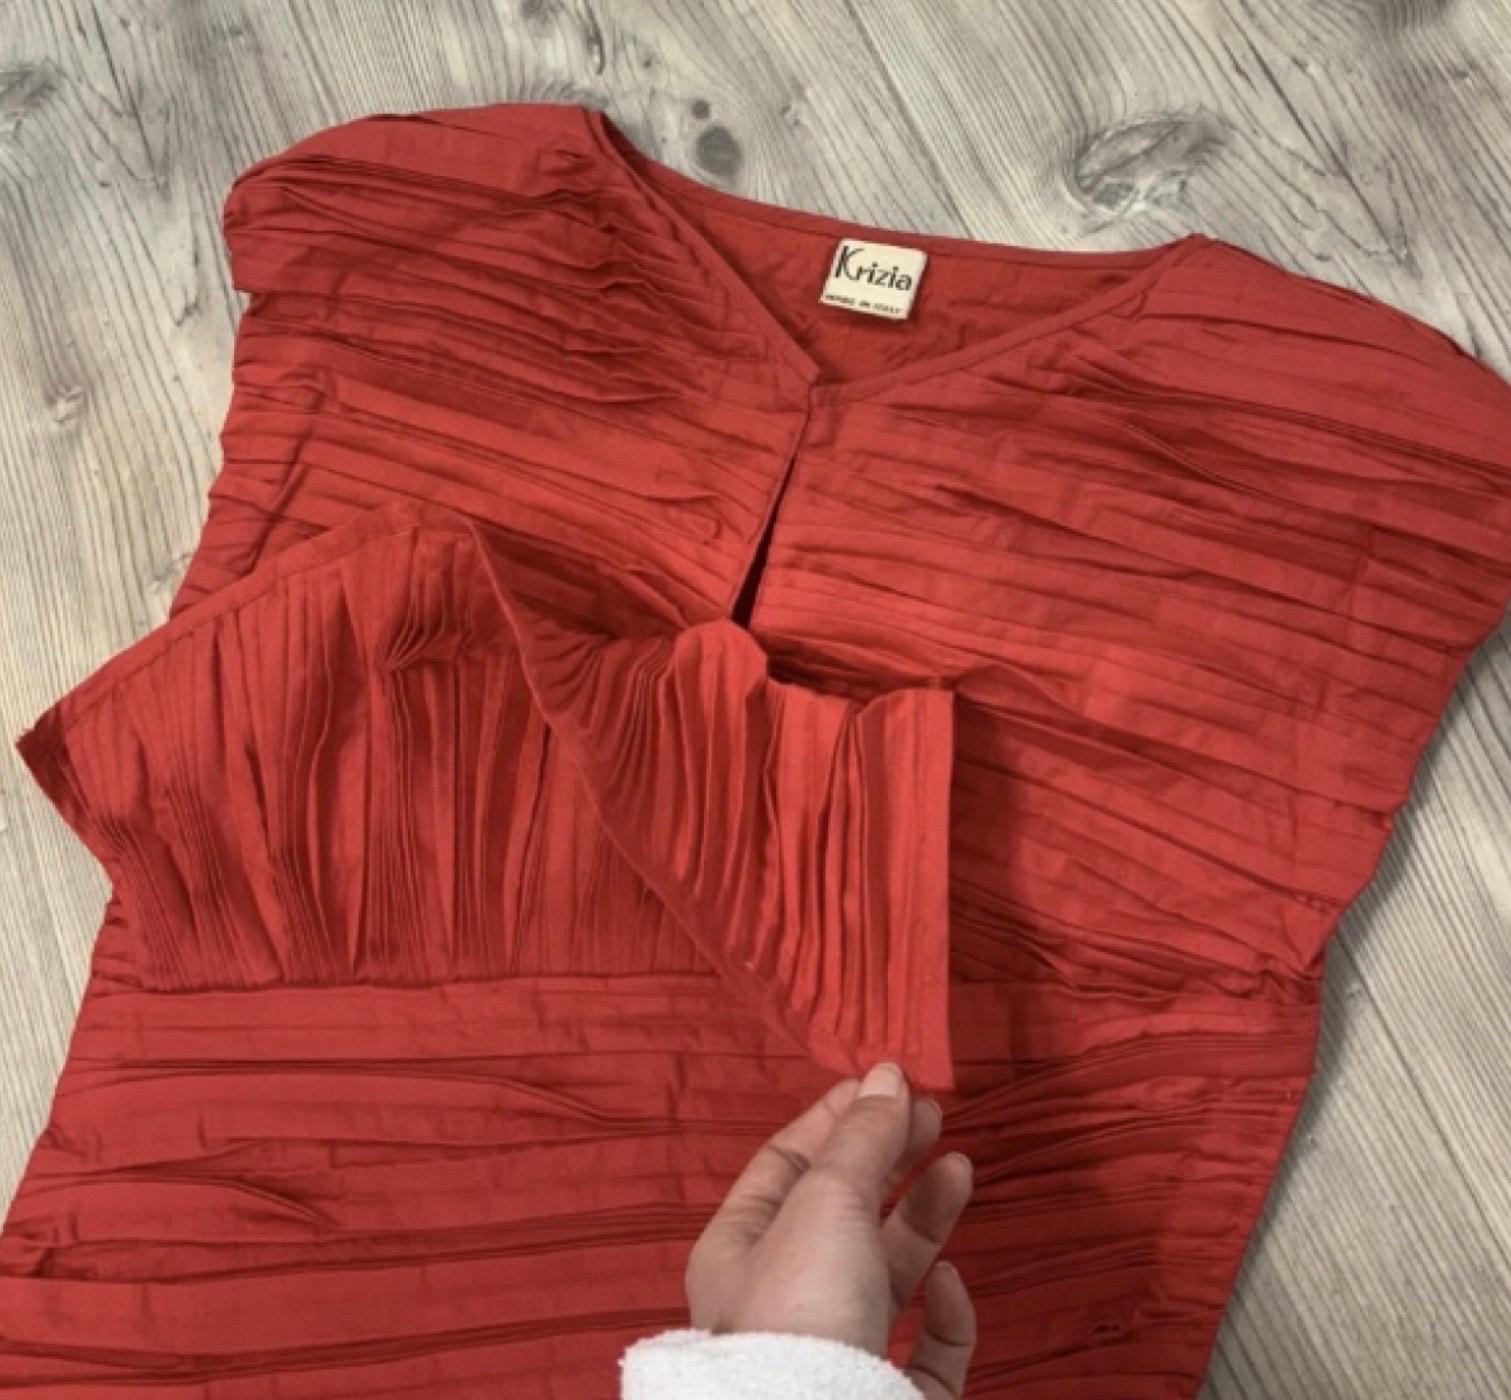 Krizia red mini dress In Excellent Condition For Sale In Carnate, IT